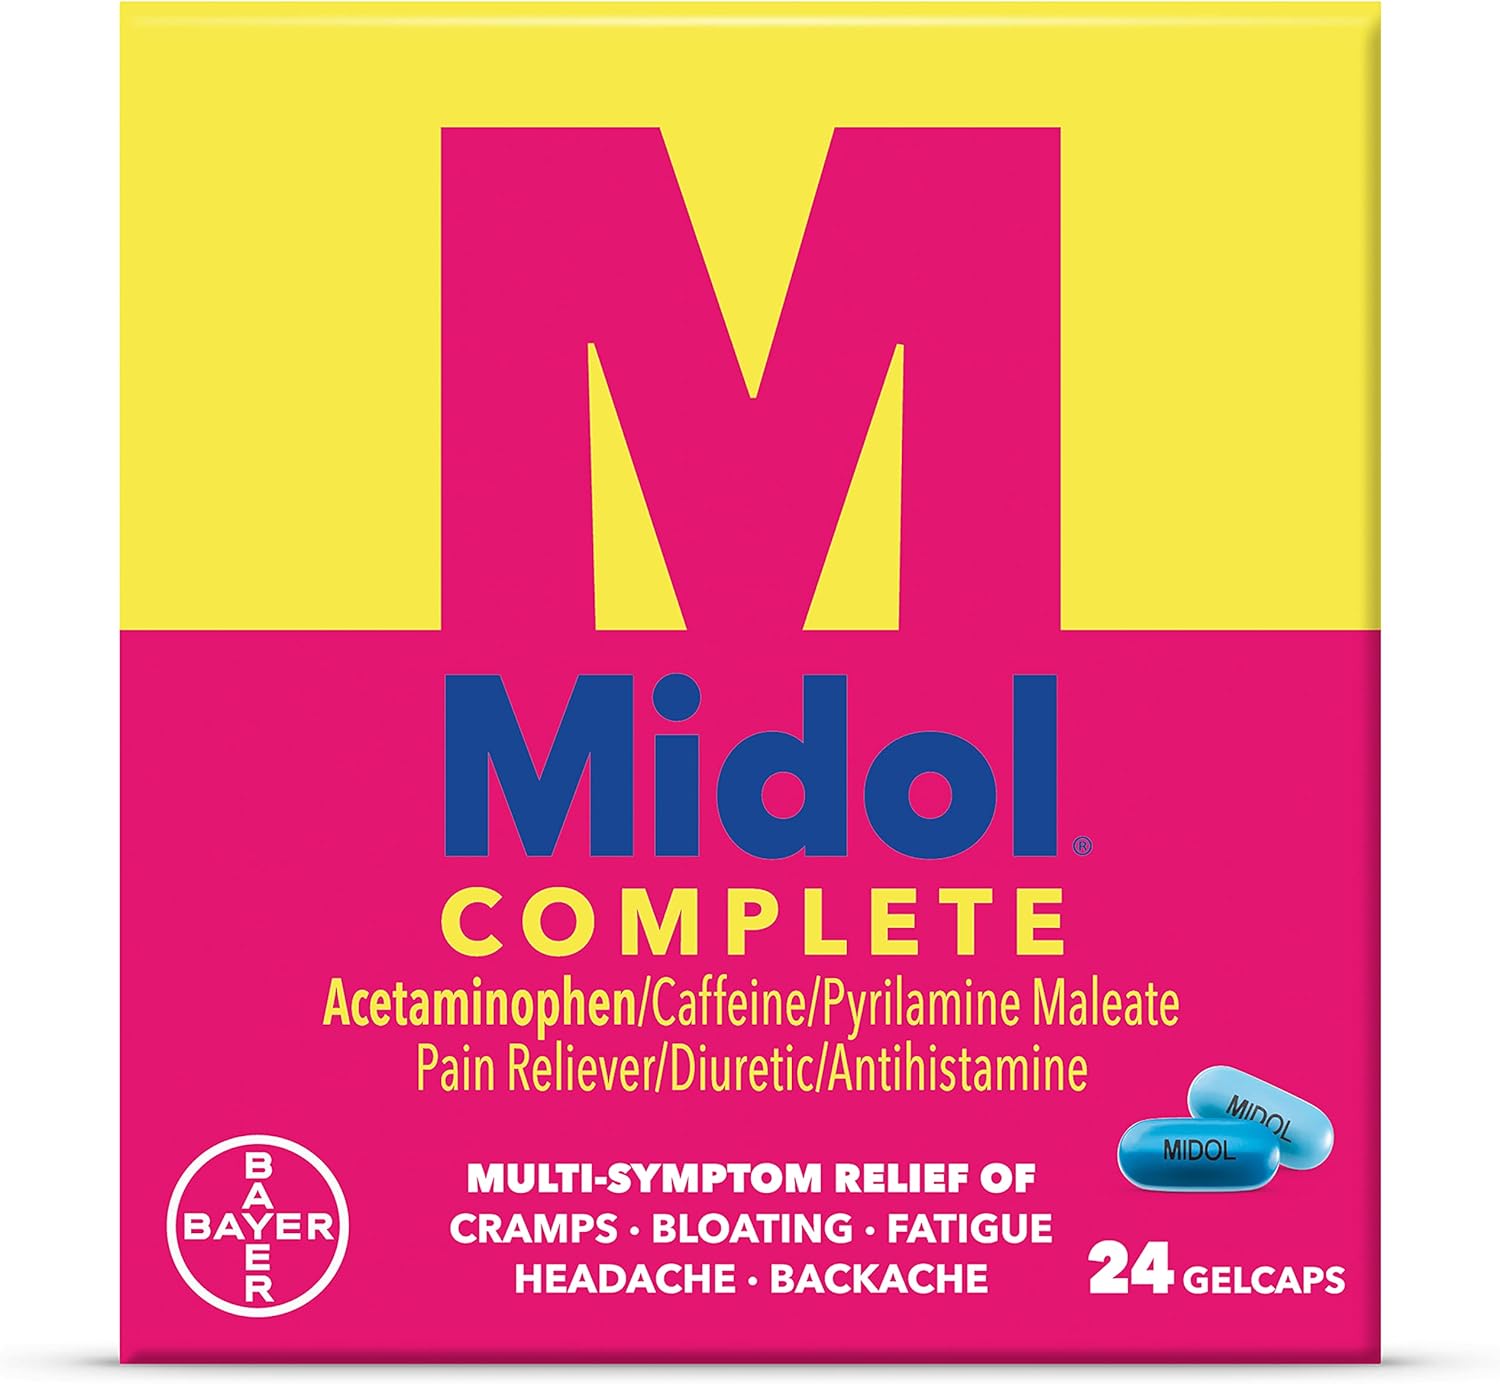 Midol Complete Gelcaps 24ct: Midol Complete Menstrual Pain Relief Gelcaps with Acetaminophen for Menstrual Symptom, PMS Relief, and Period Cramp Relief - 24 Count (Packaging May Vary)